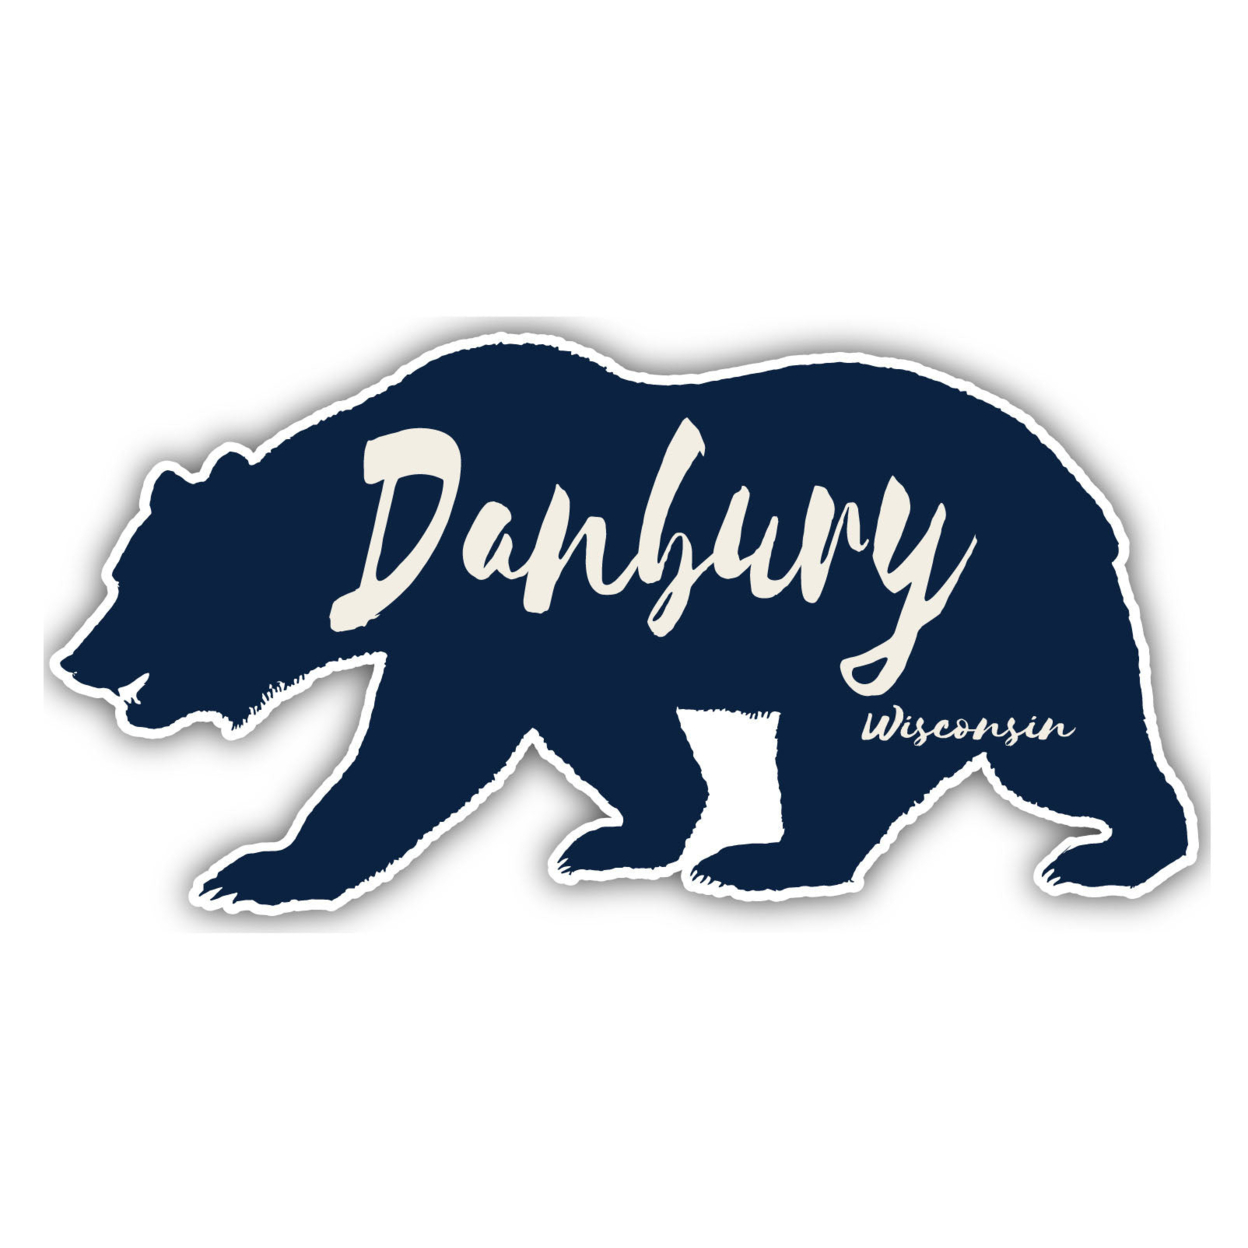 Danbury Wisconsin Souvenir Decorative Stickers (Choose Theme And Size) - Single Unit, 10-Inch, Great Outdoors